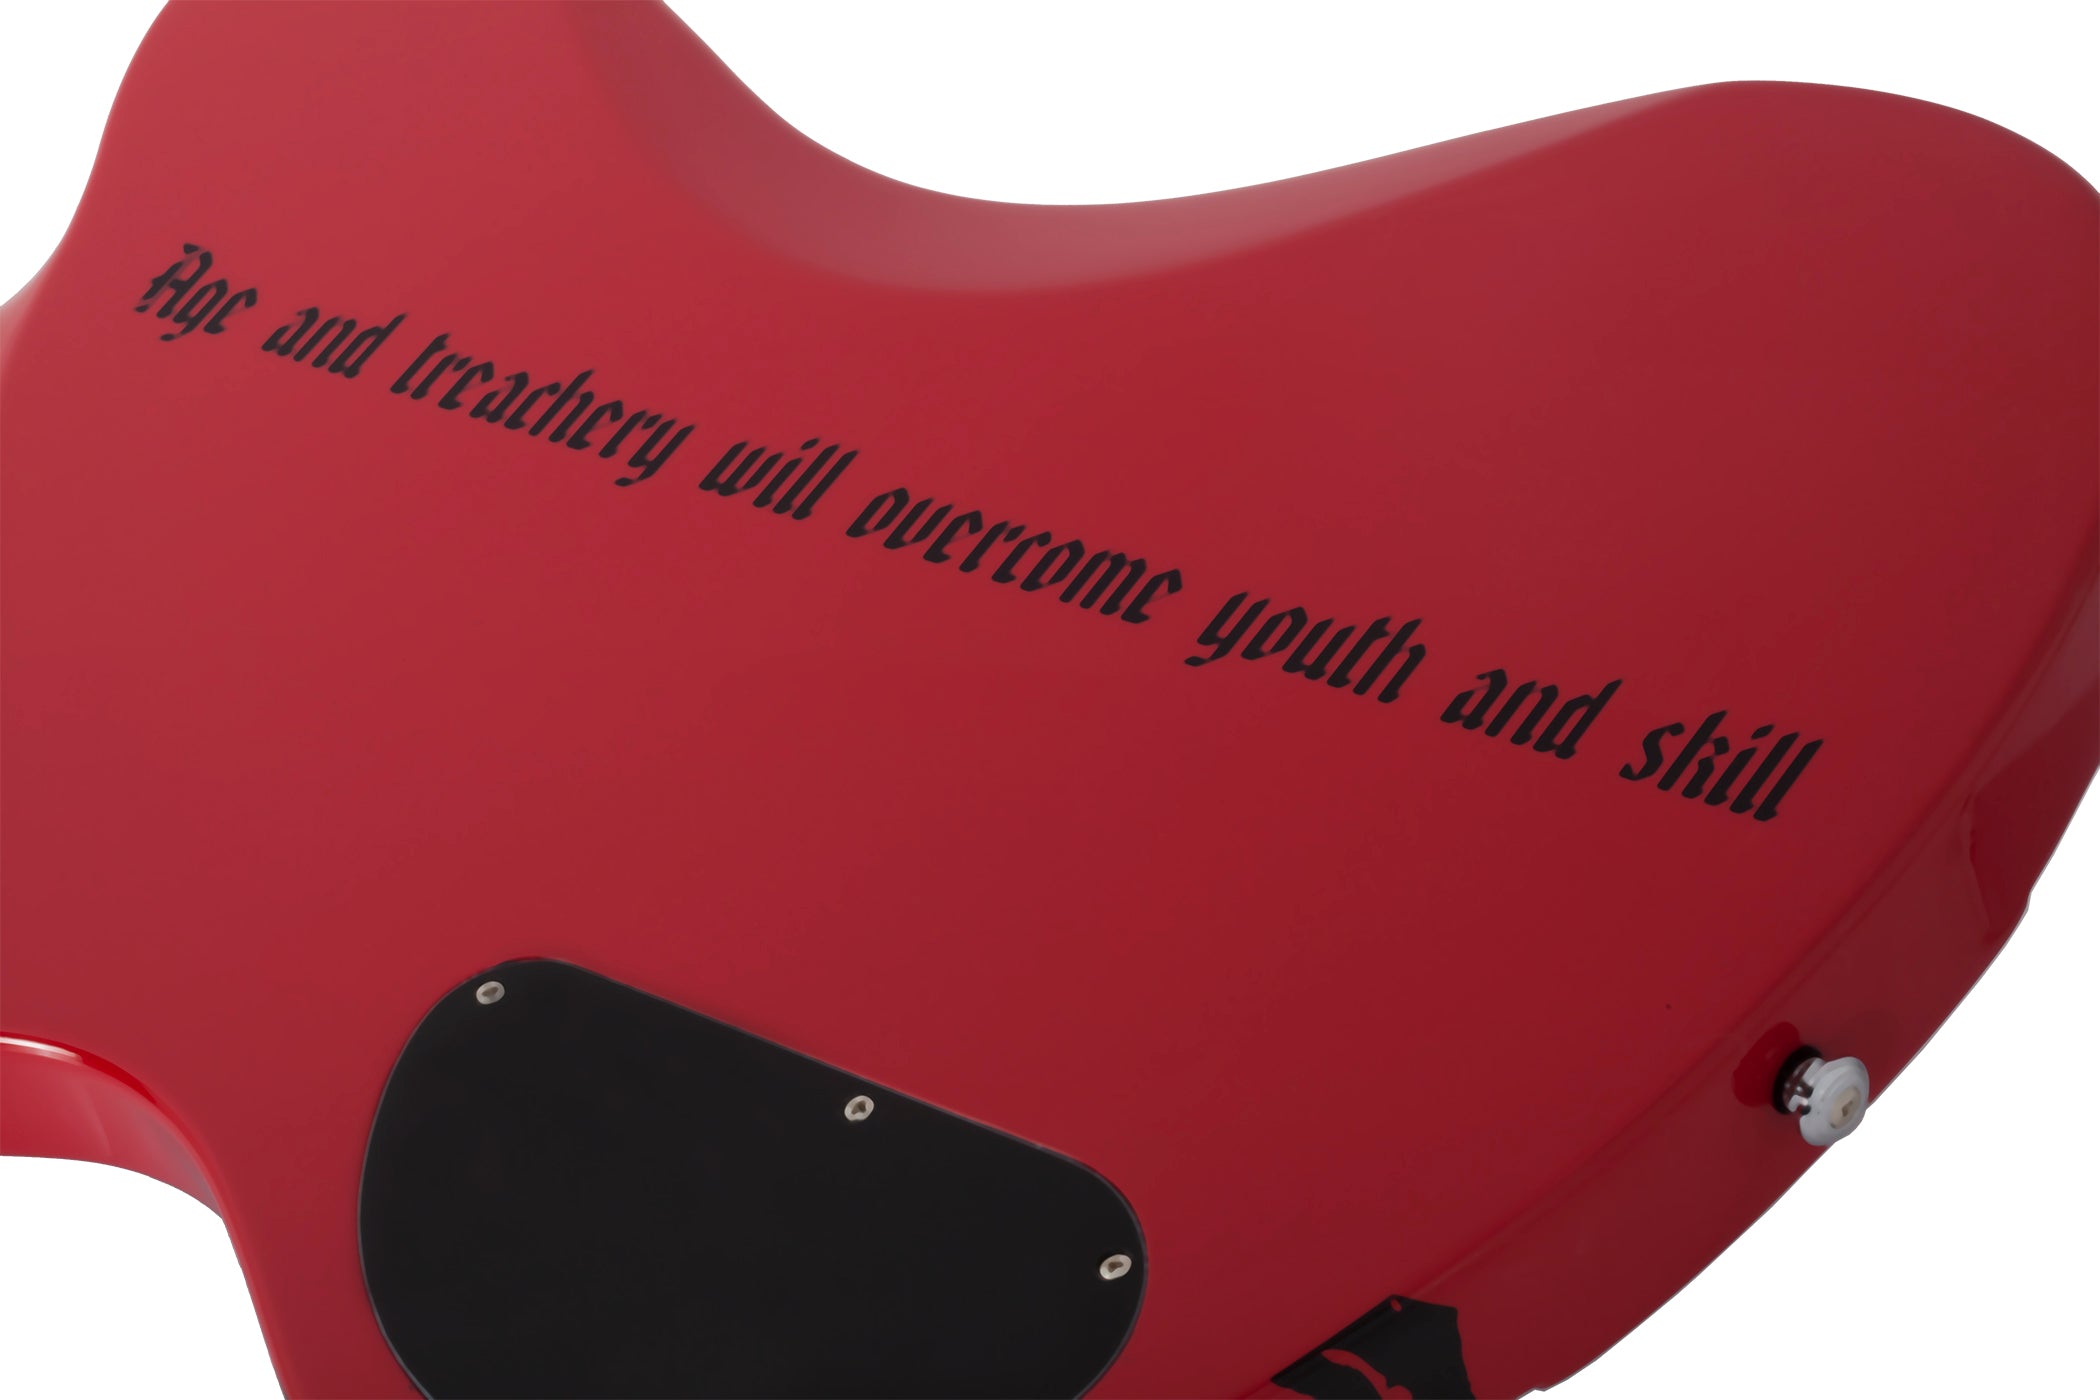 Schecter Simon Gallup Ultra Spitfire Electric Bass in Red 2266-SHC